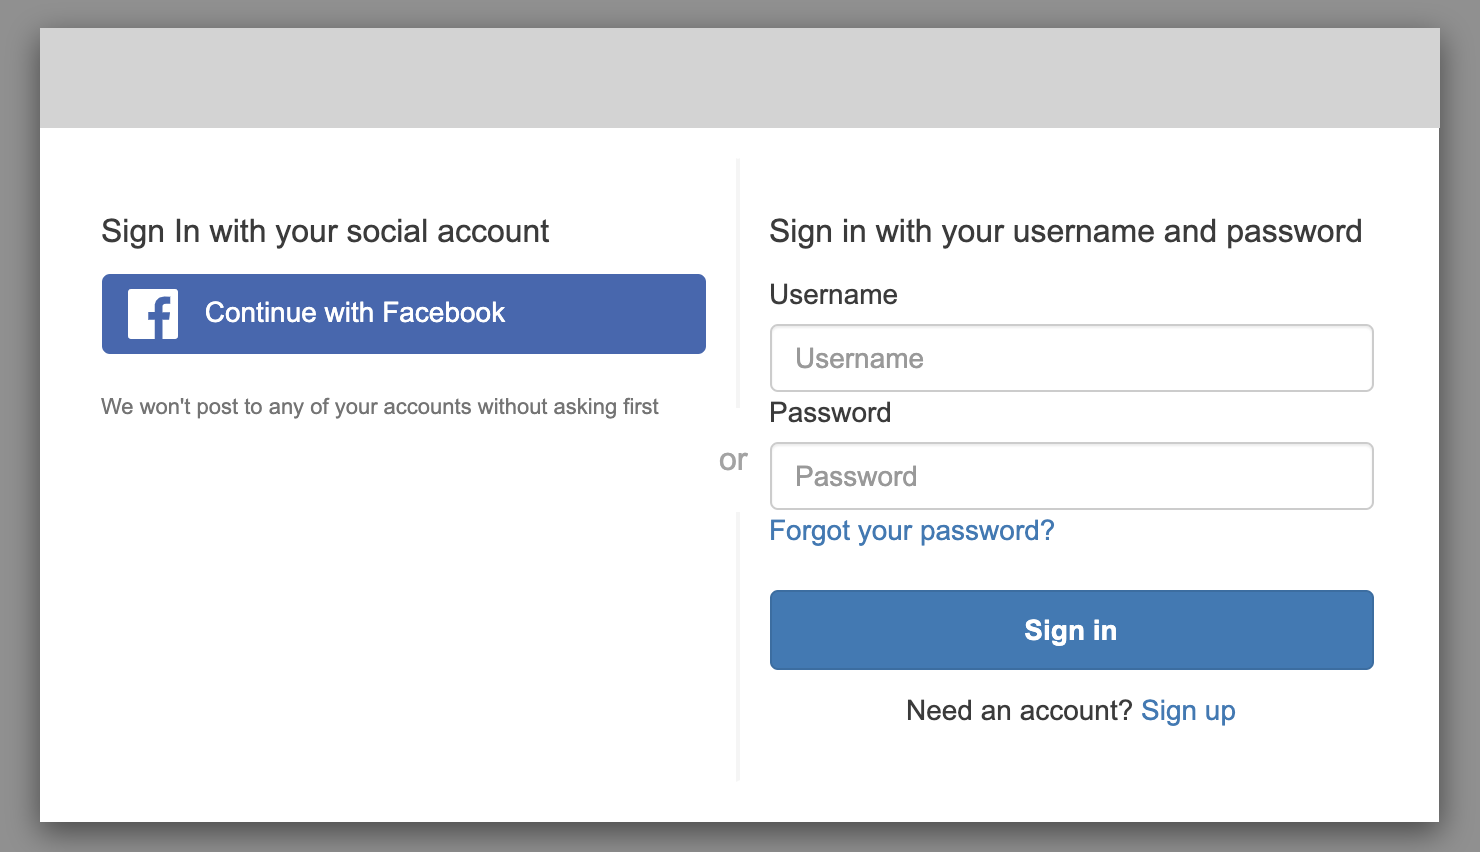 How to Connect Facebook Auth to React Native App